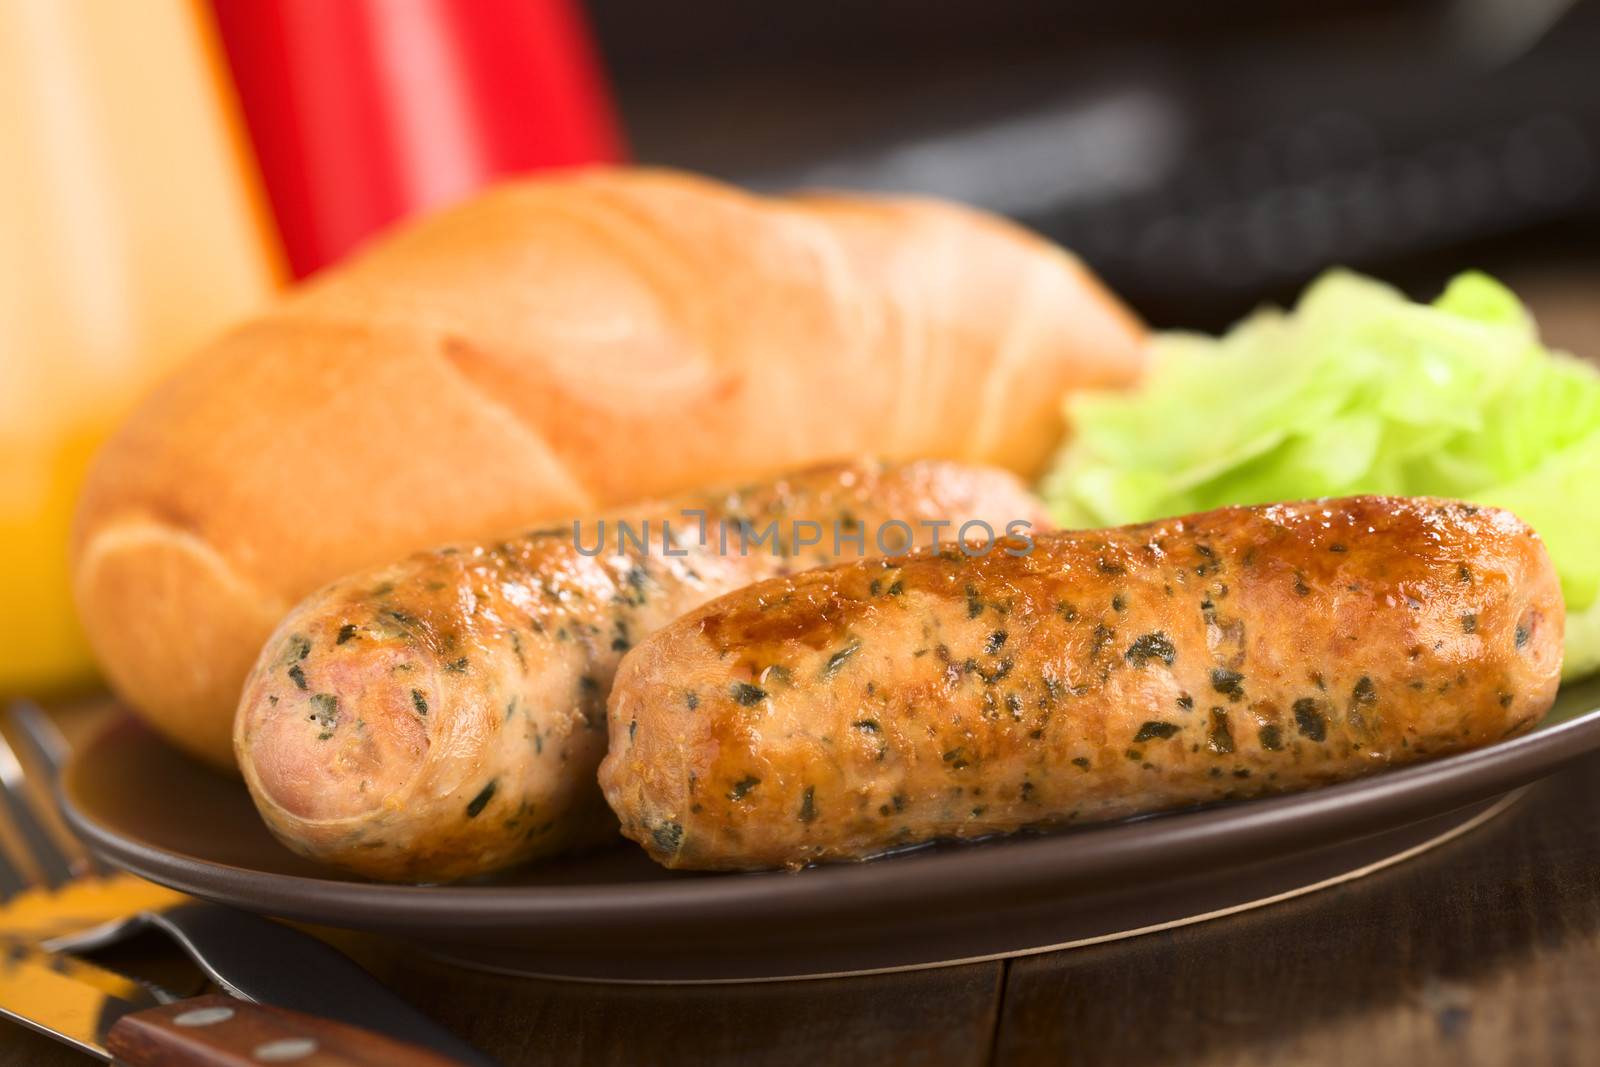 Fried bratwurst with bun, traditional German fast food served on plate with green salad (Selective Focus, Focus on the front of the first bratwurst)